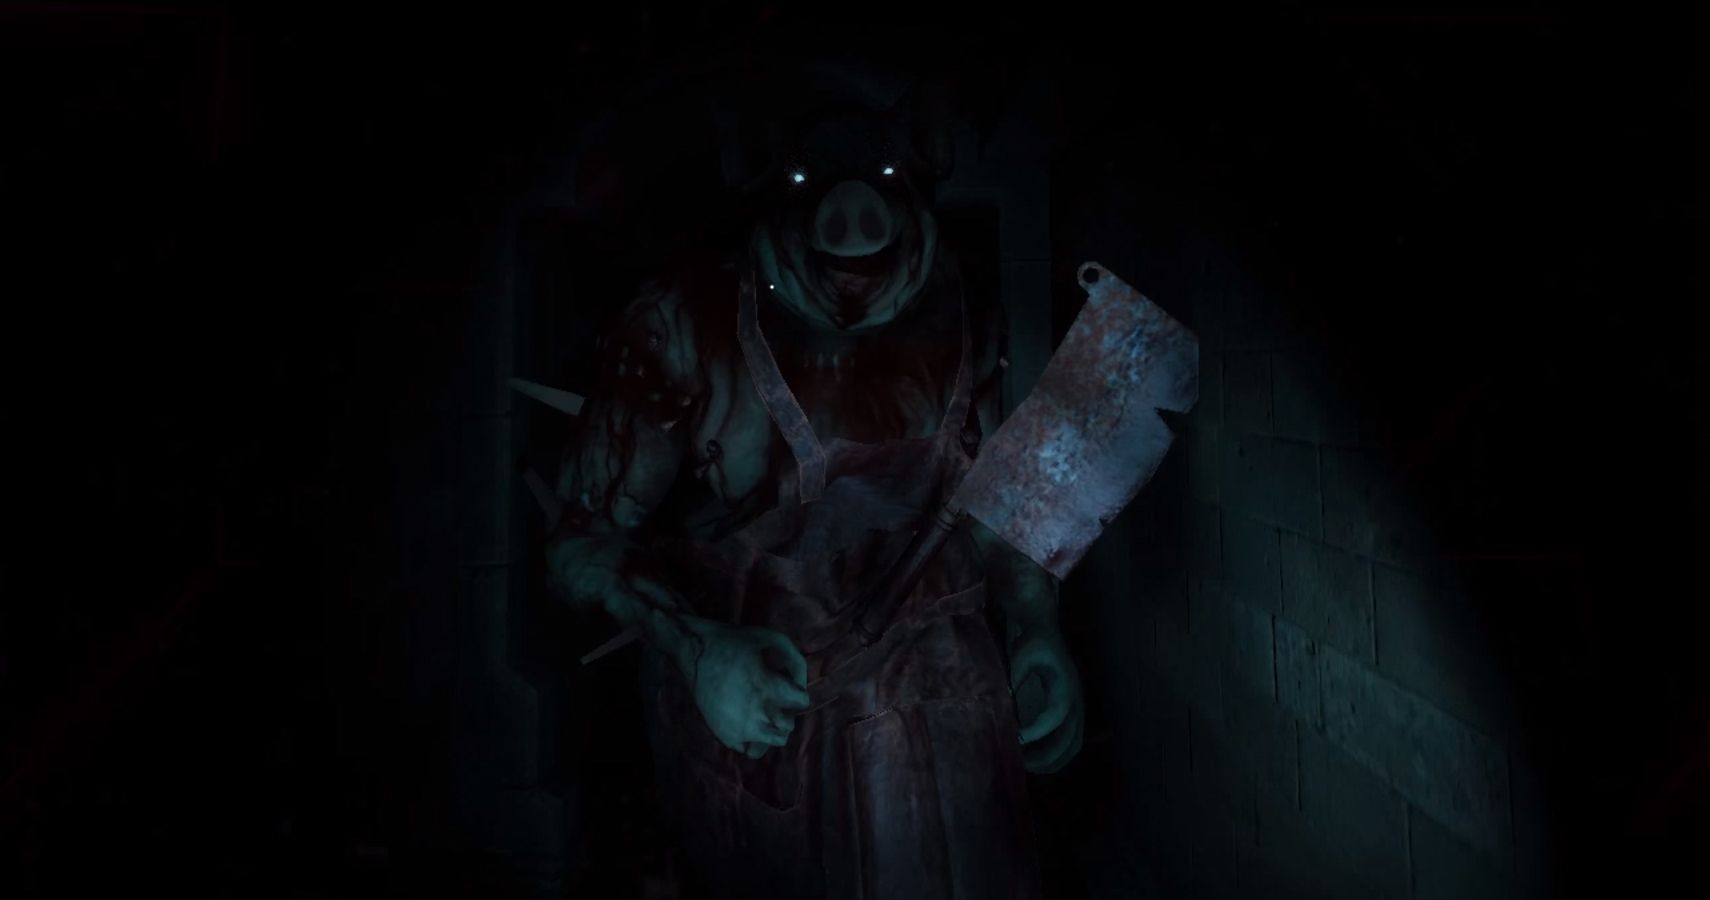 Multiplayer Horror Game 'White Noise Online' Now Available on Steam